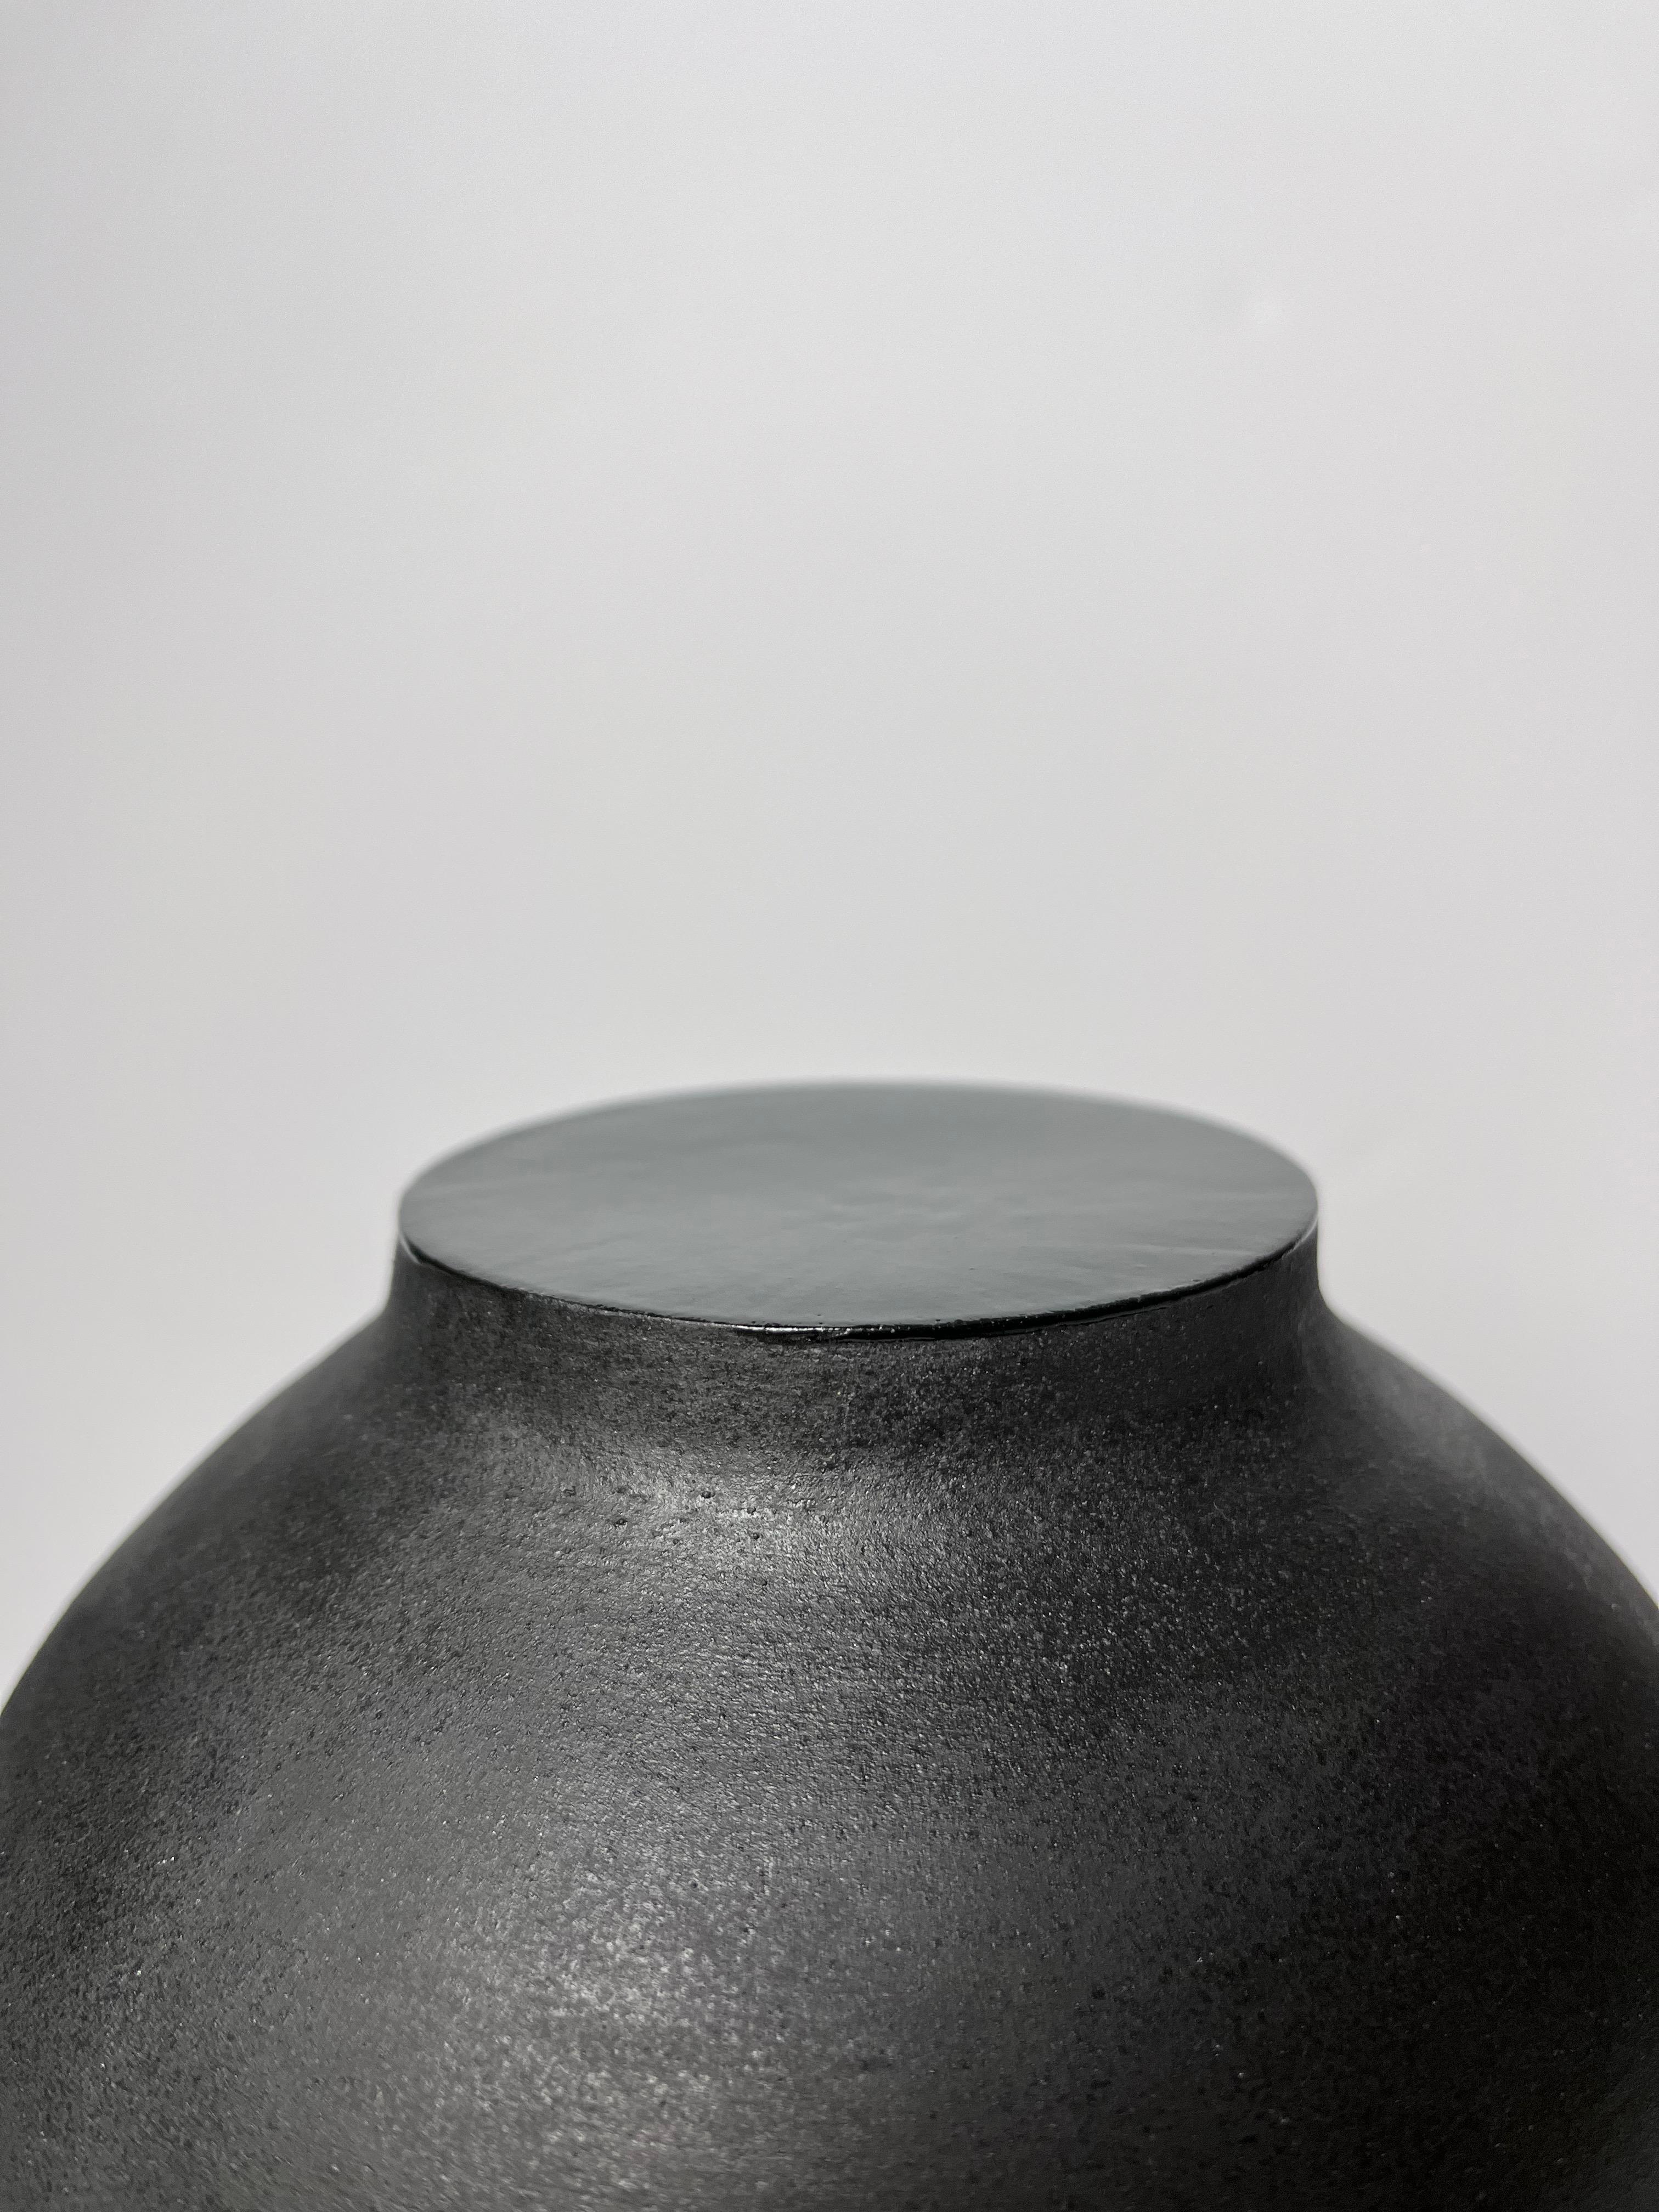 Black stoneware vase with central opening and cement gray stoneware interior. Upper part of the neck closed with black enameling.
Entirely handmade.